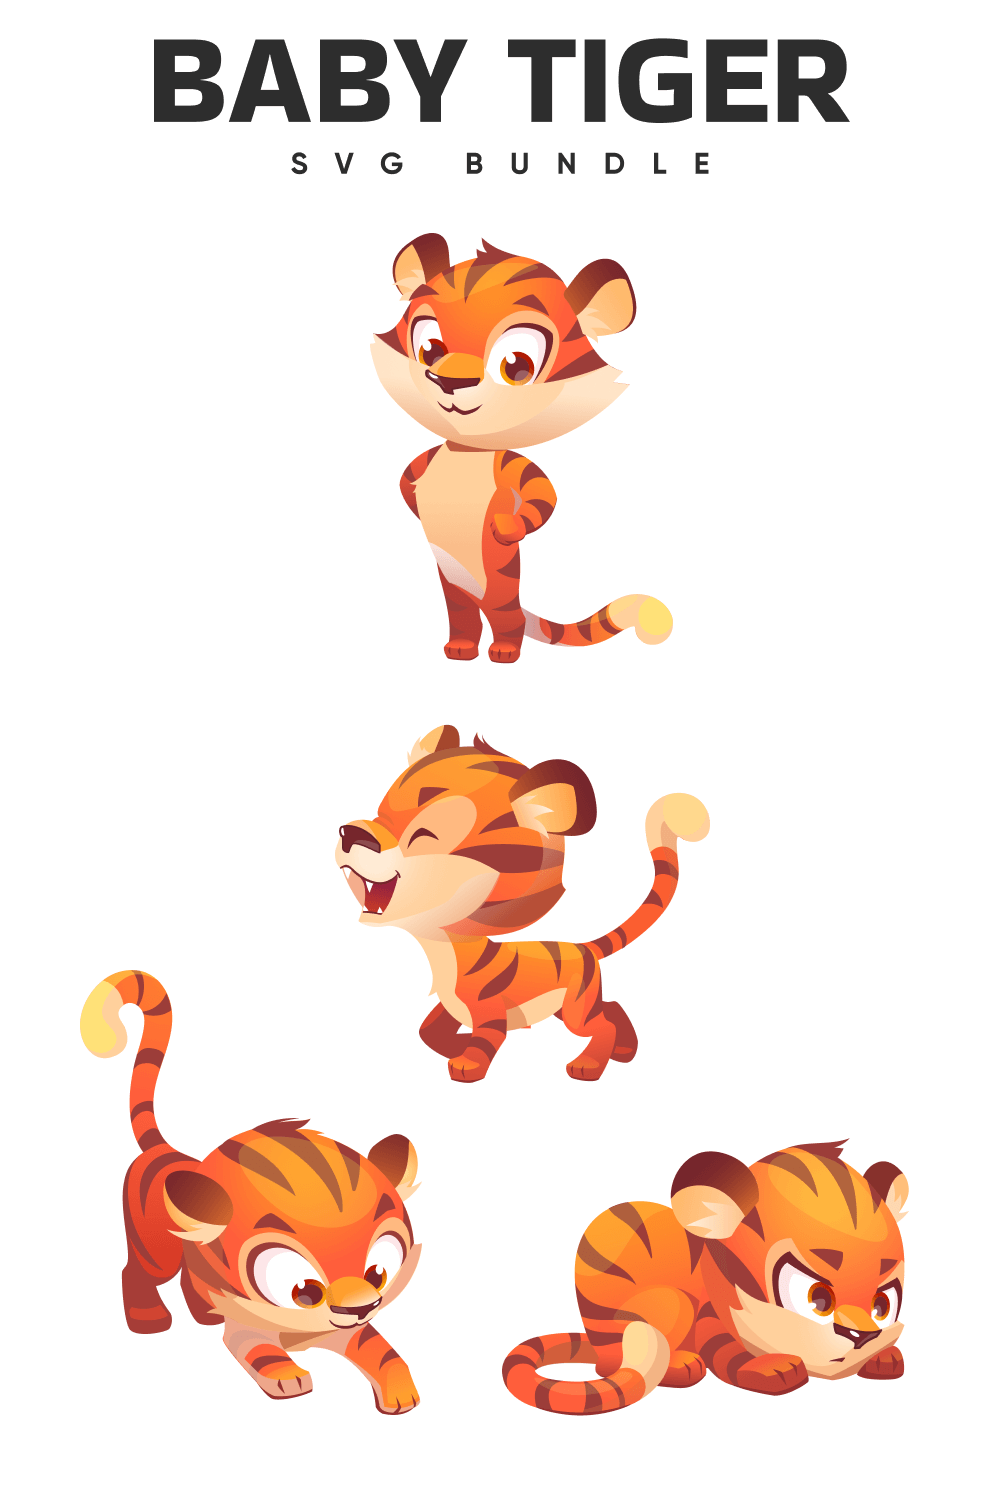 Cartoon tiger is shown in three different positions.